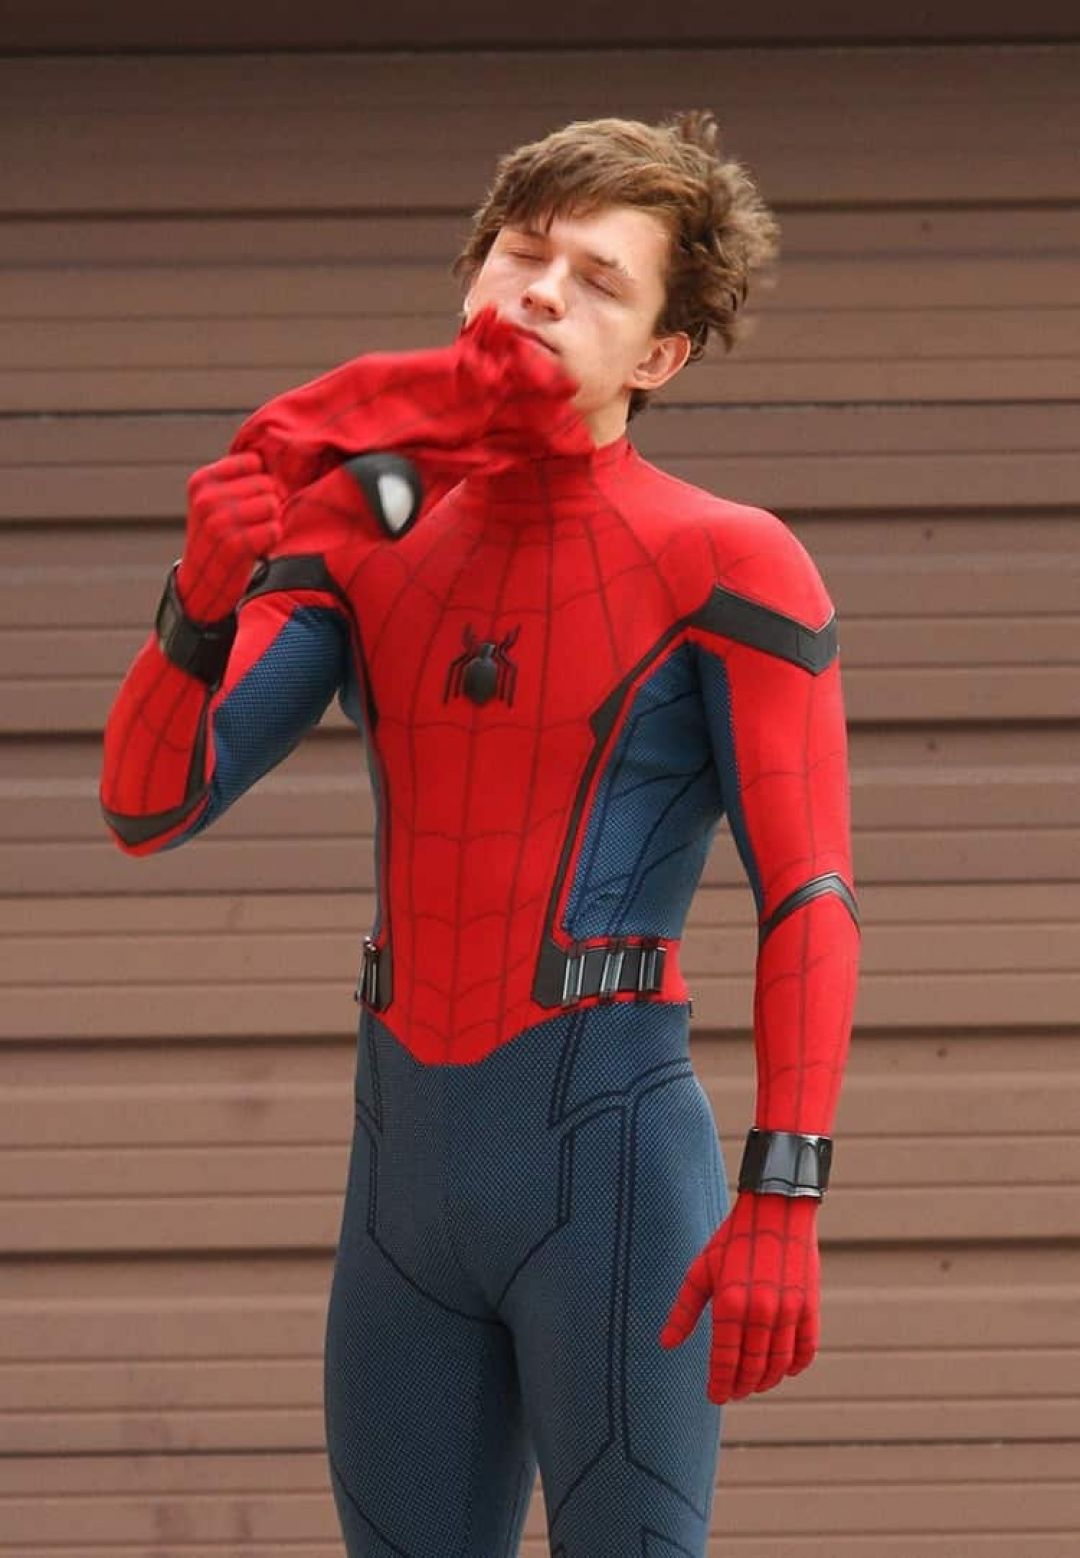 ✓ [100+] Tom Holland - Android, iPhone, Desktop HD Backgrounds / Wallpapers  (1080p, 4k) (2023)